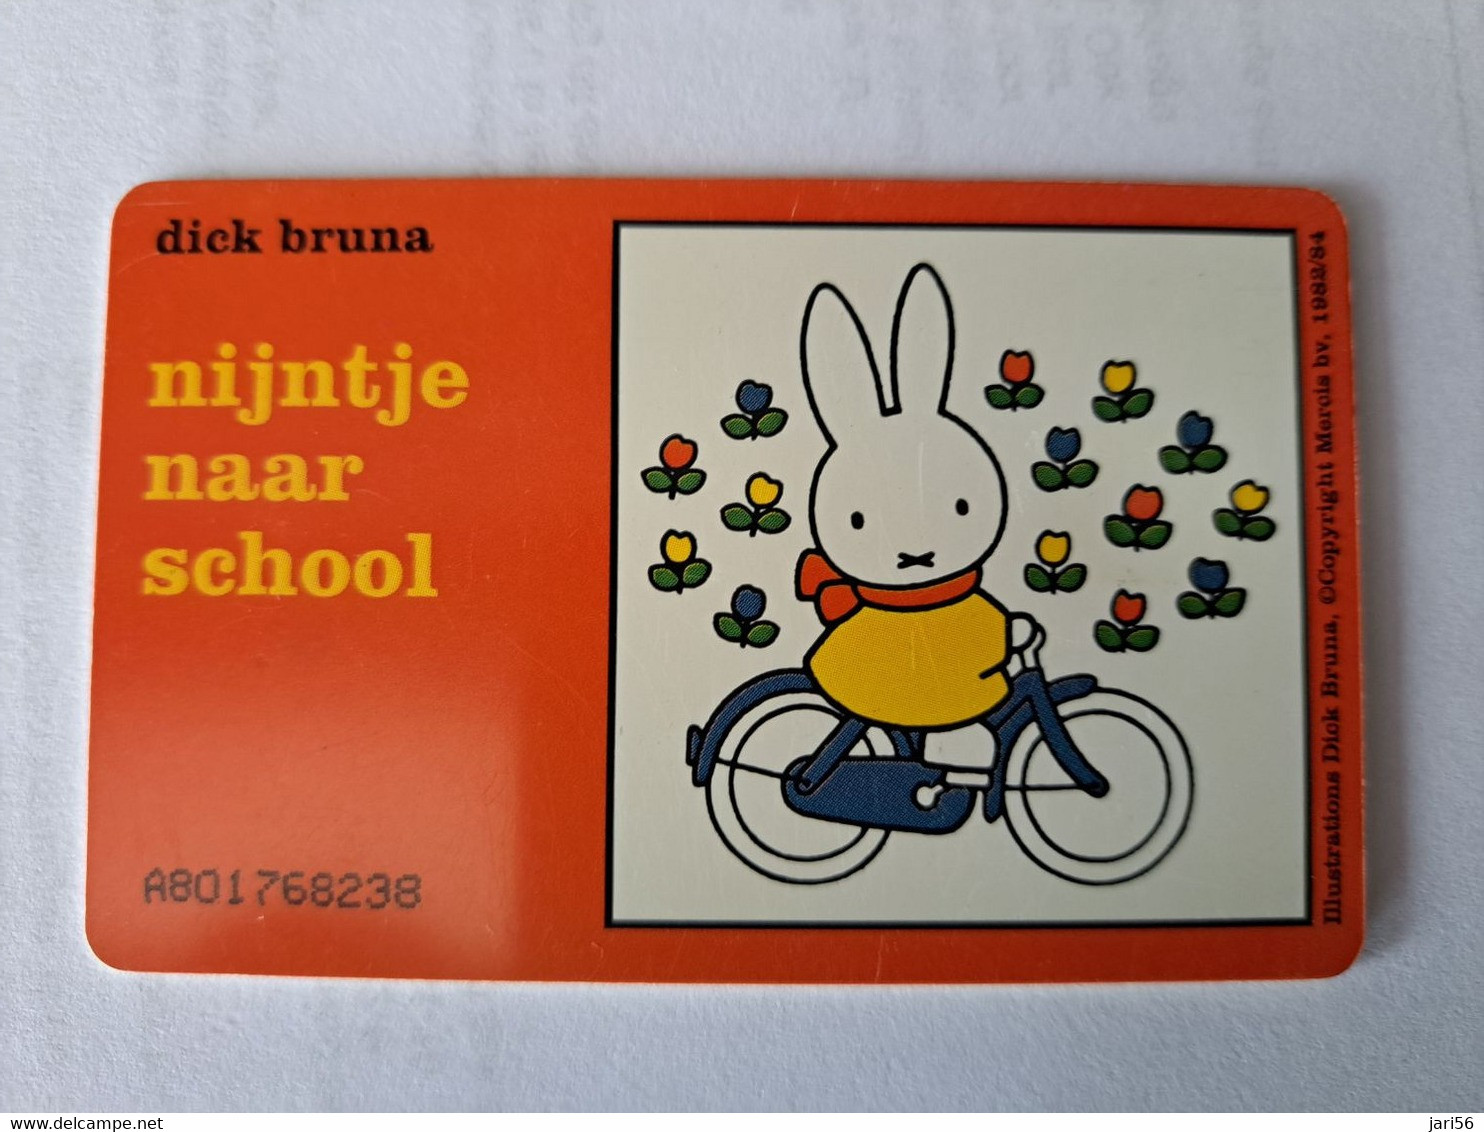 NETHERLANDS CHIPCARD  HFL 10,00  COMIC / NIJNTJE BY DICK ARTIST  /  Used Card  ** 11087 ** - Publiques